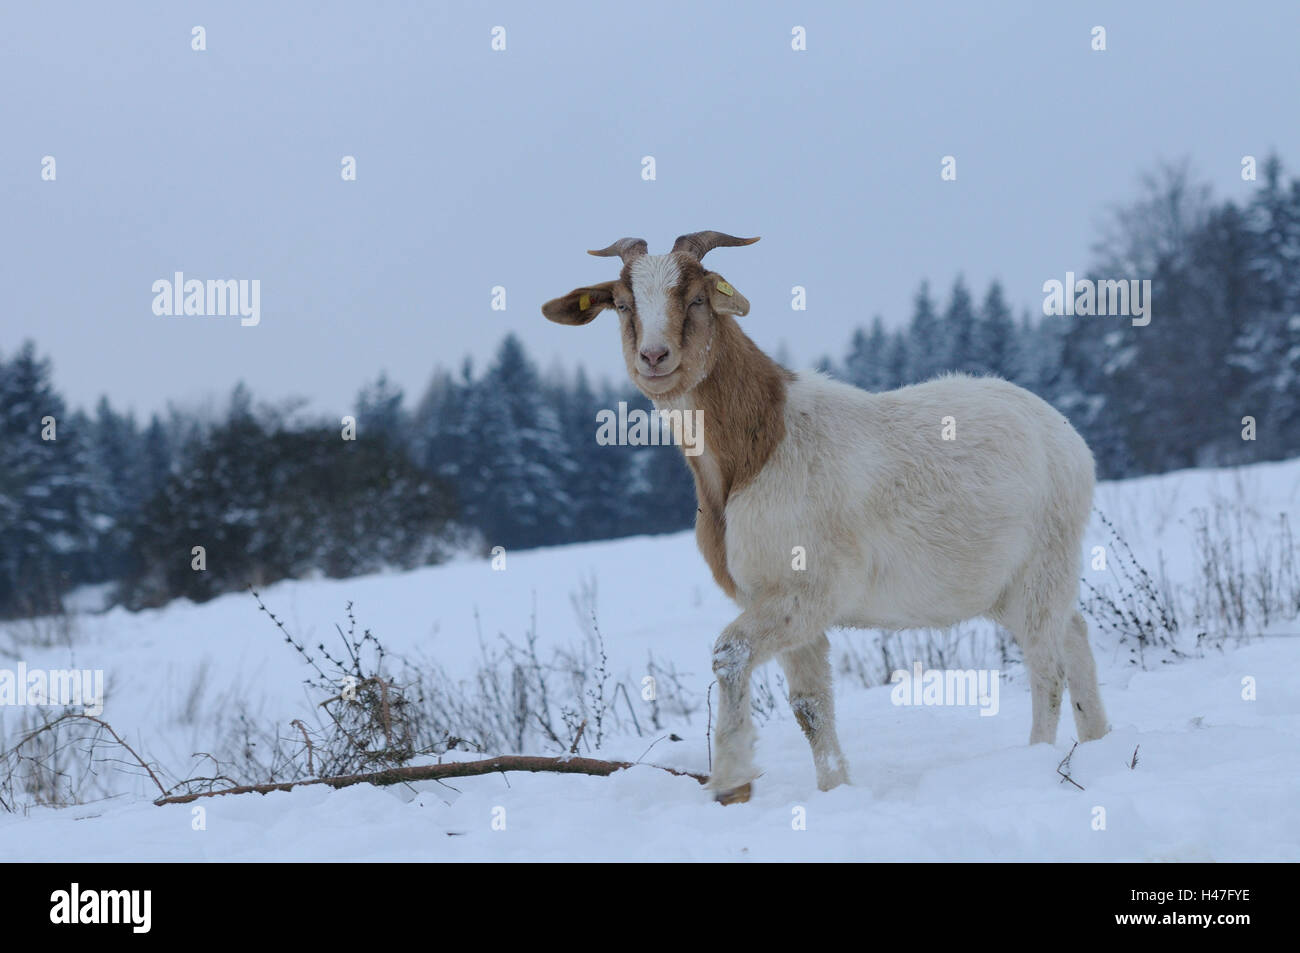 Boer goat, side view, standing, Looking at camera, snow, winter, Stock Photo